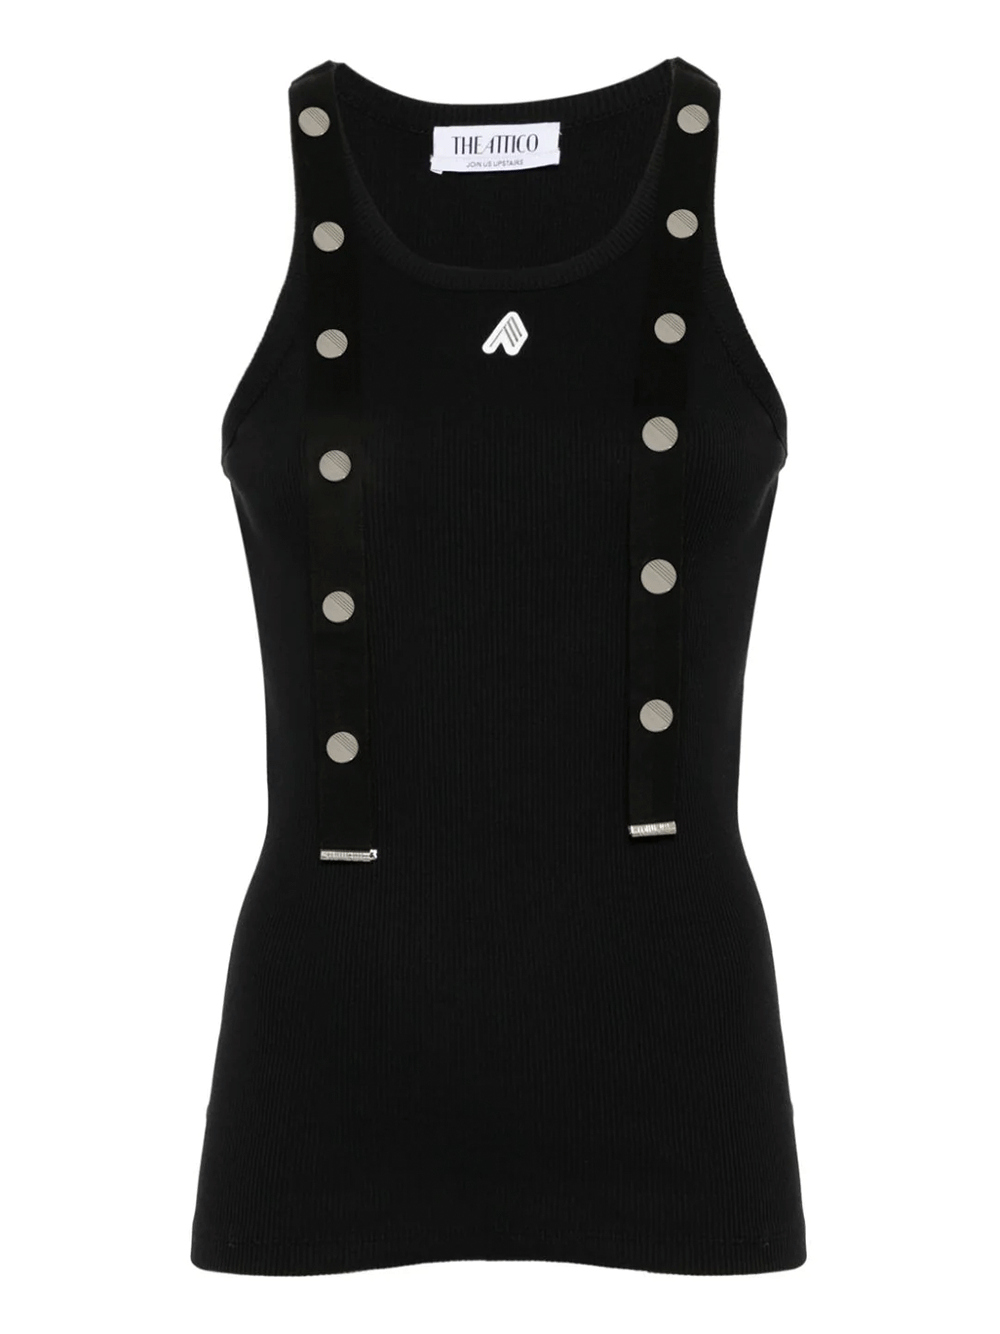 The-Attico-Tank-Top-With-Snap-Details-Black-1